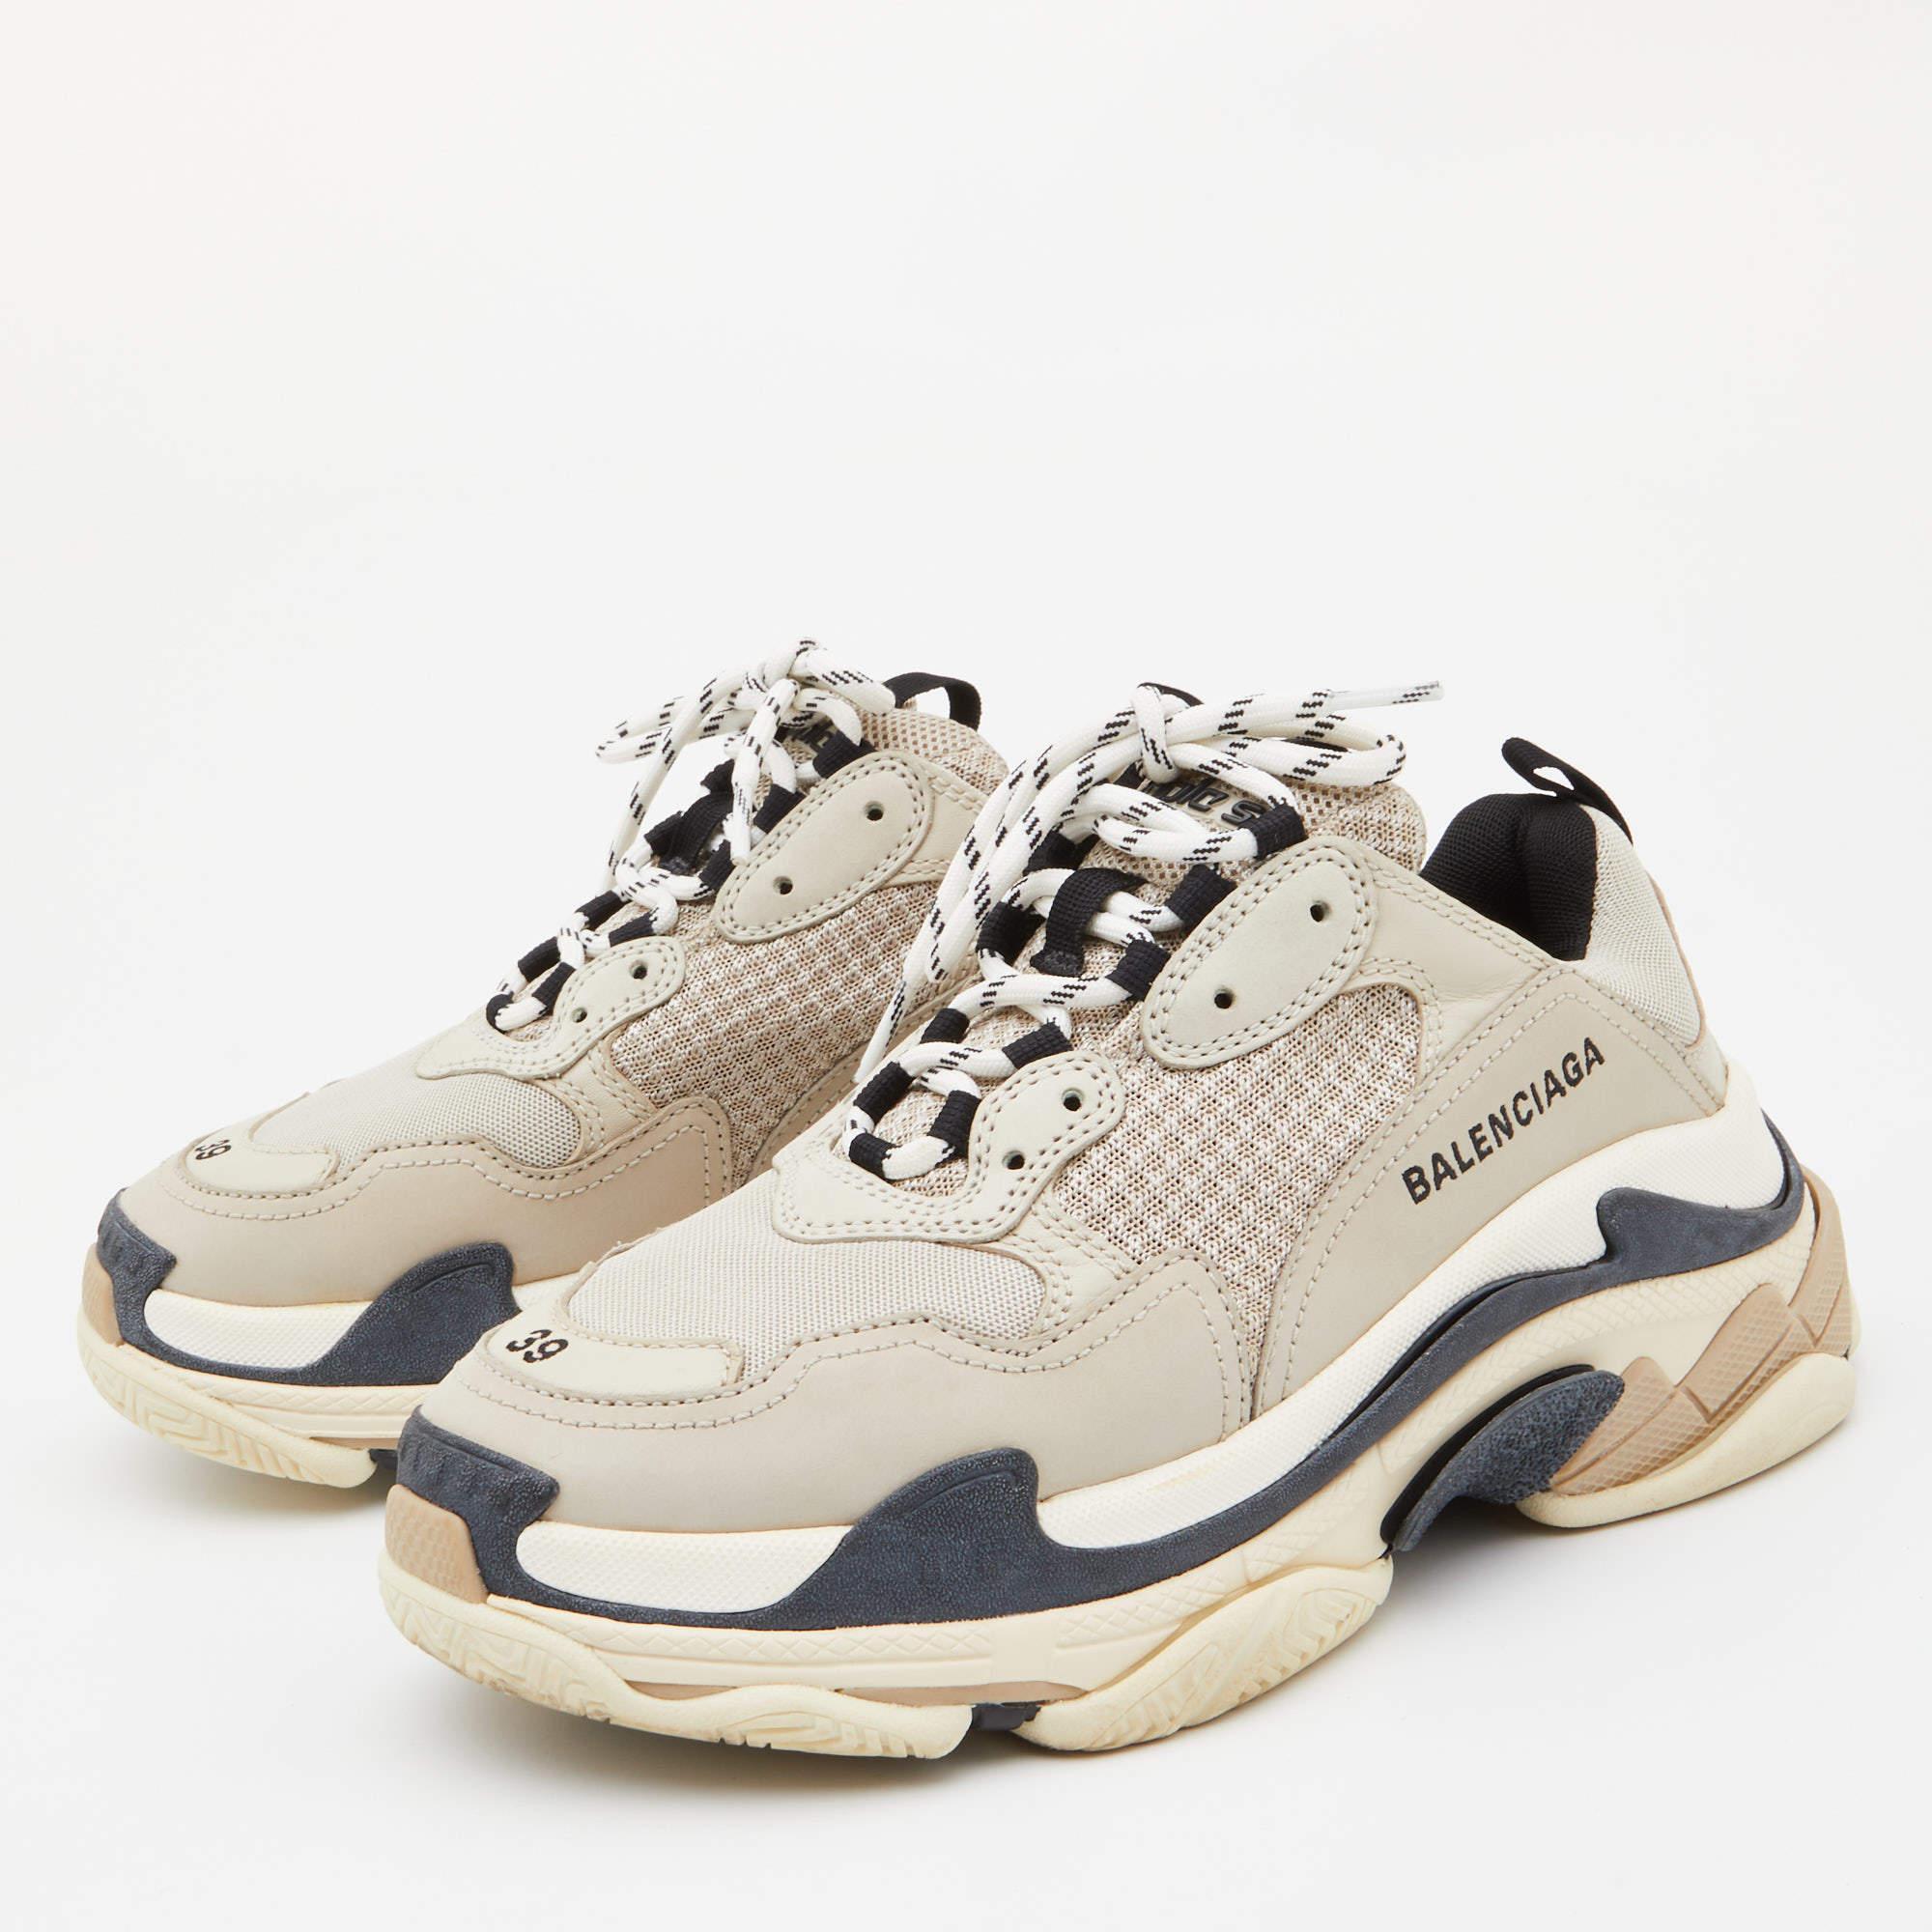 Balenciaga Grey Mesh and Leather Triple S Sneakers Size 39 3